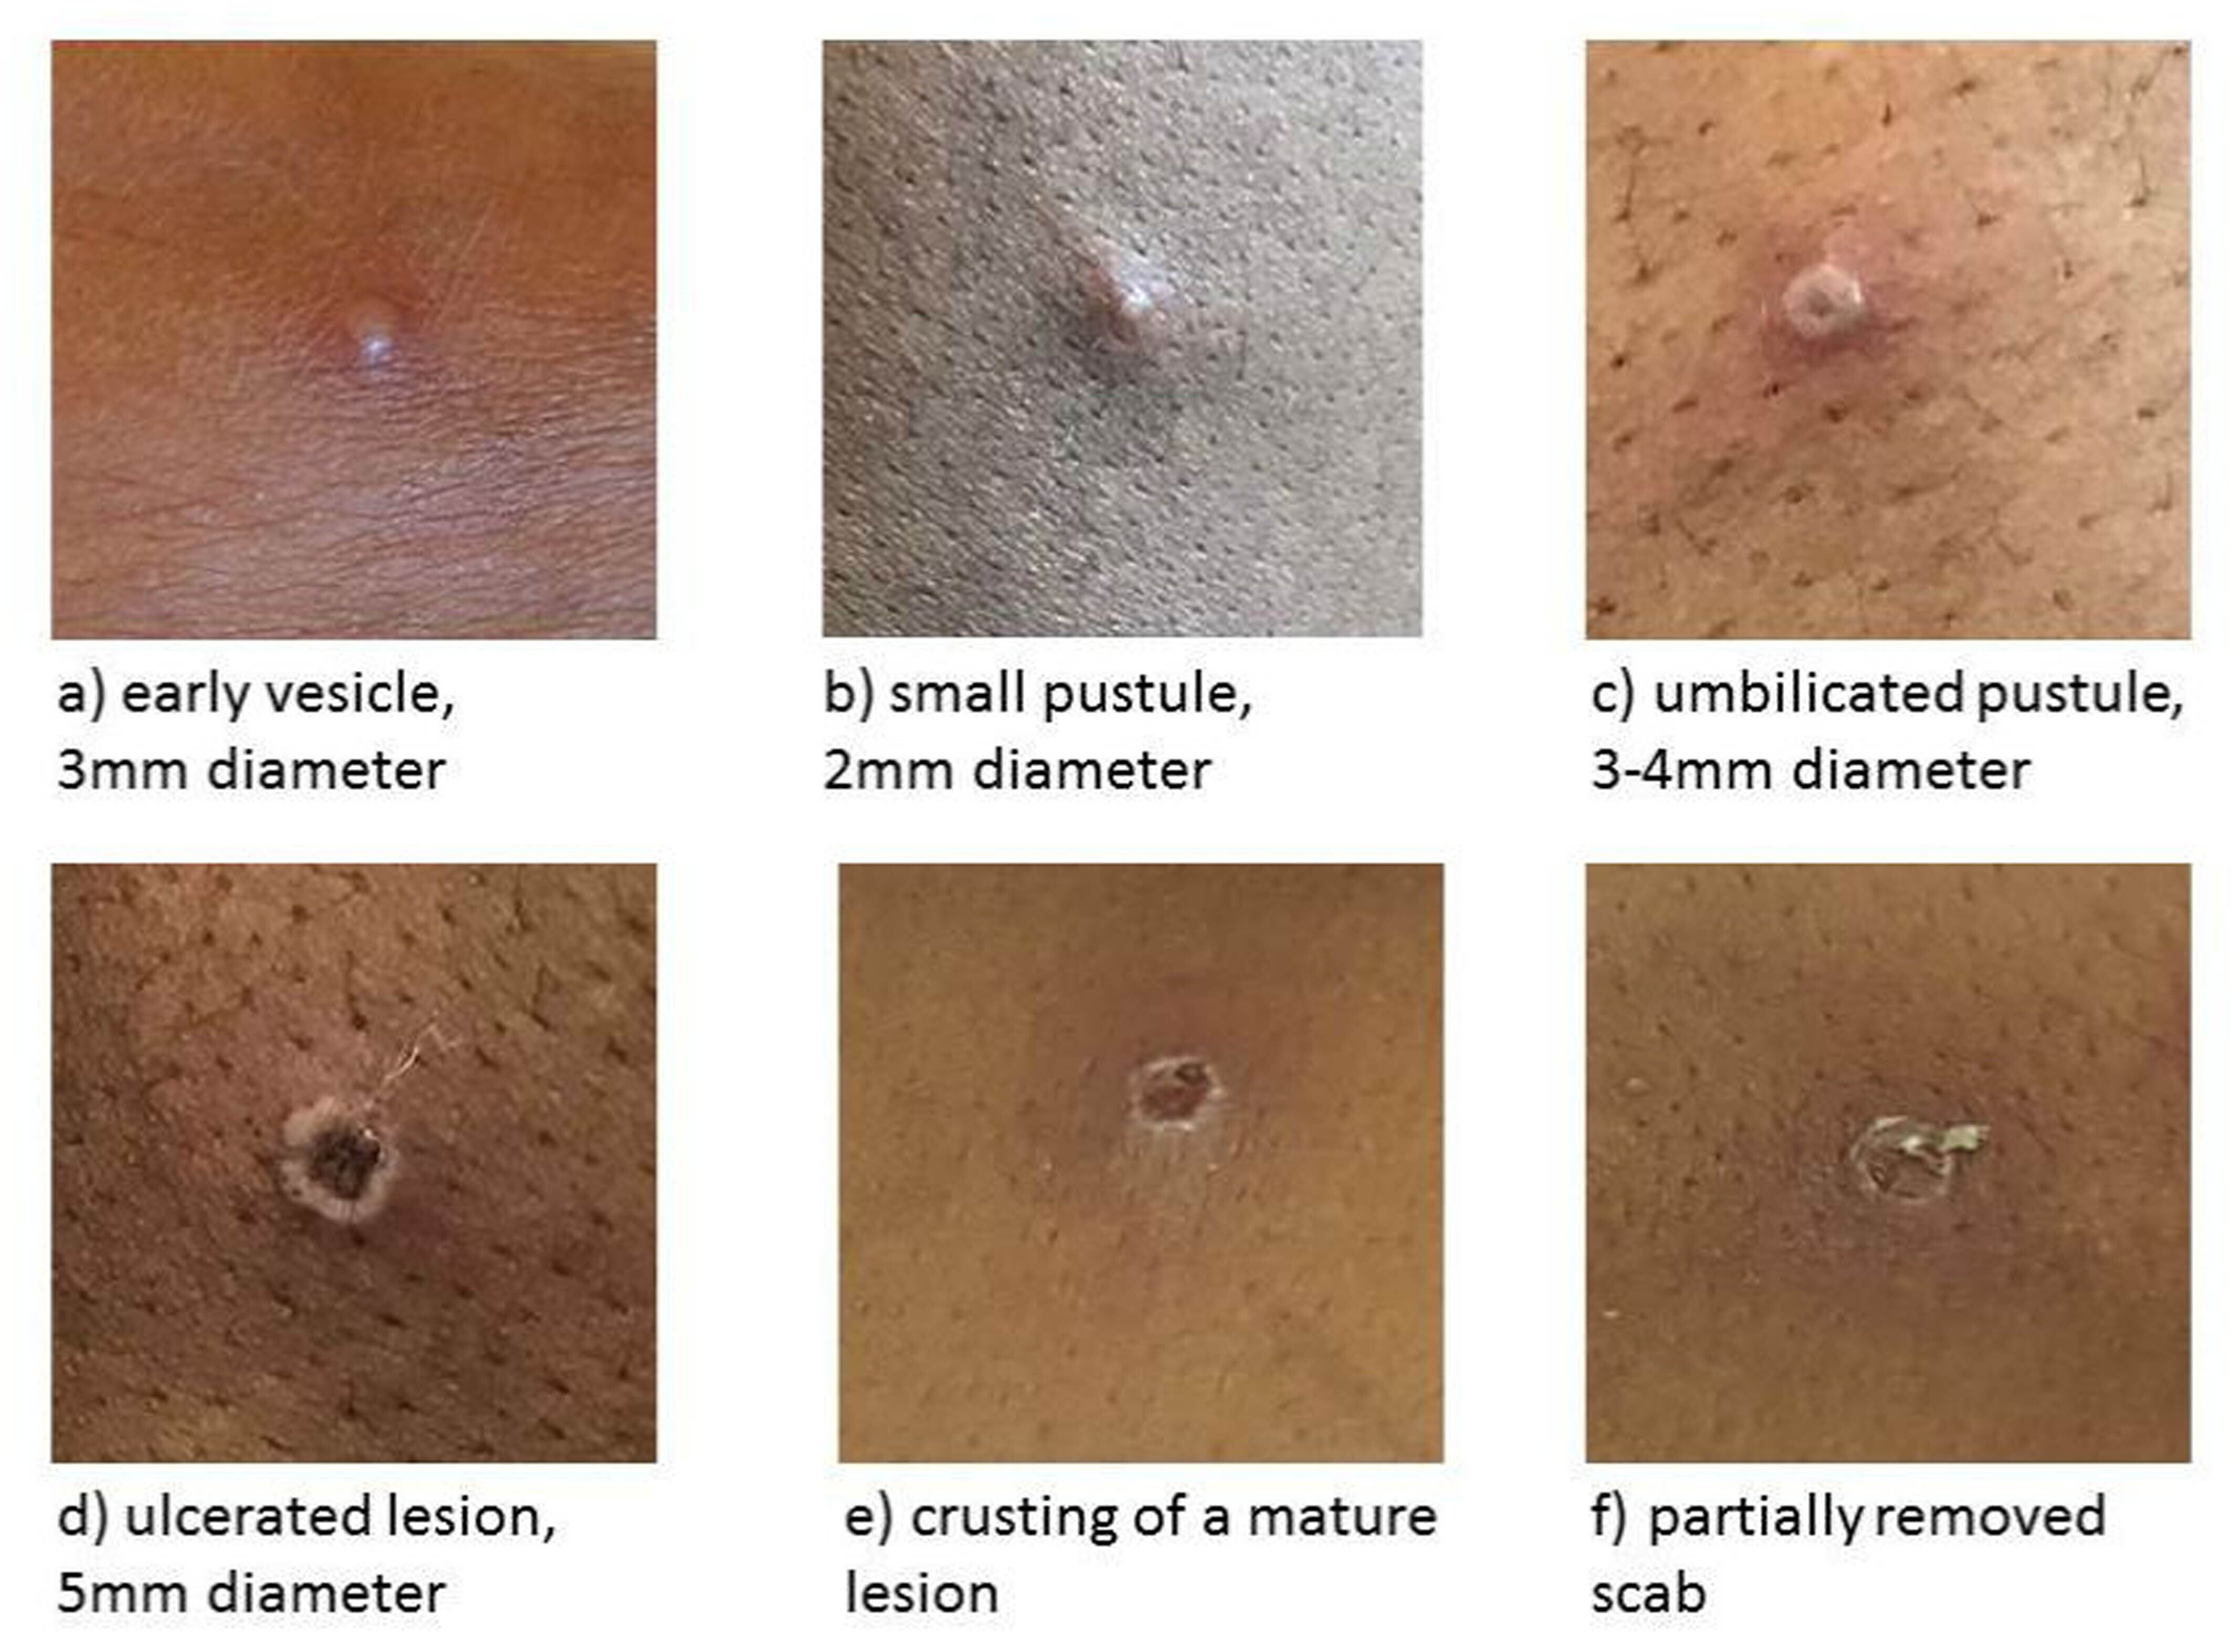 The condition results in blisters on the body, which then scab over)